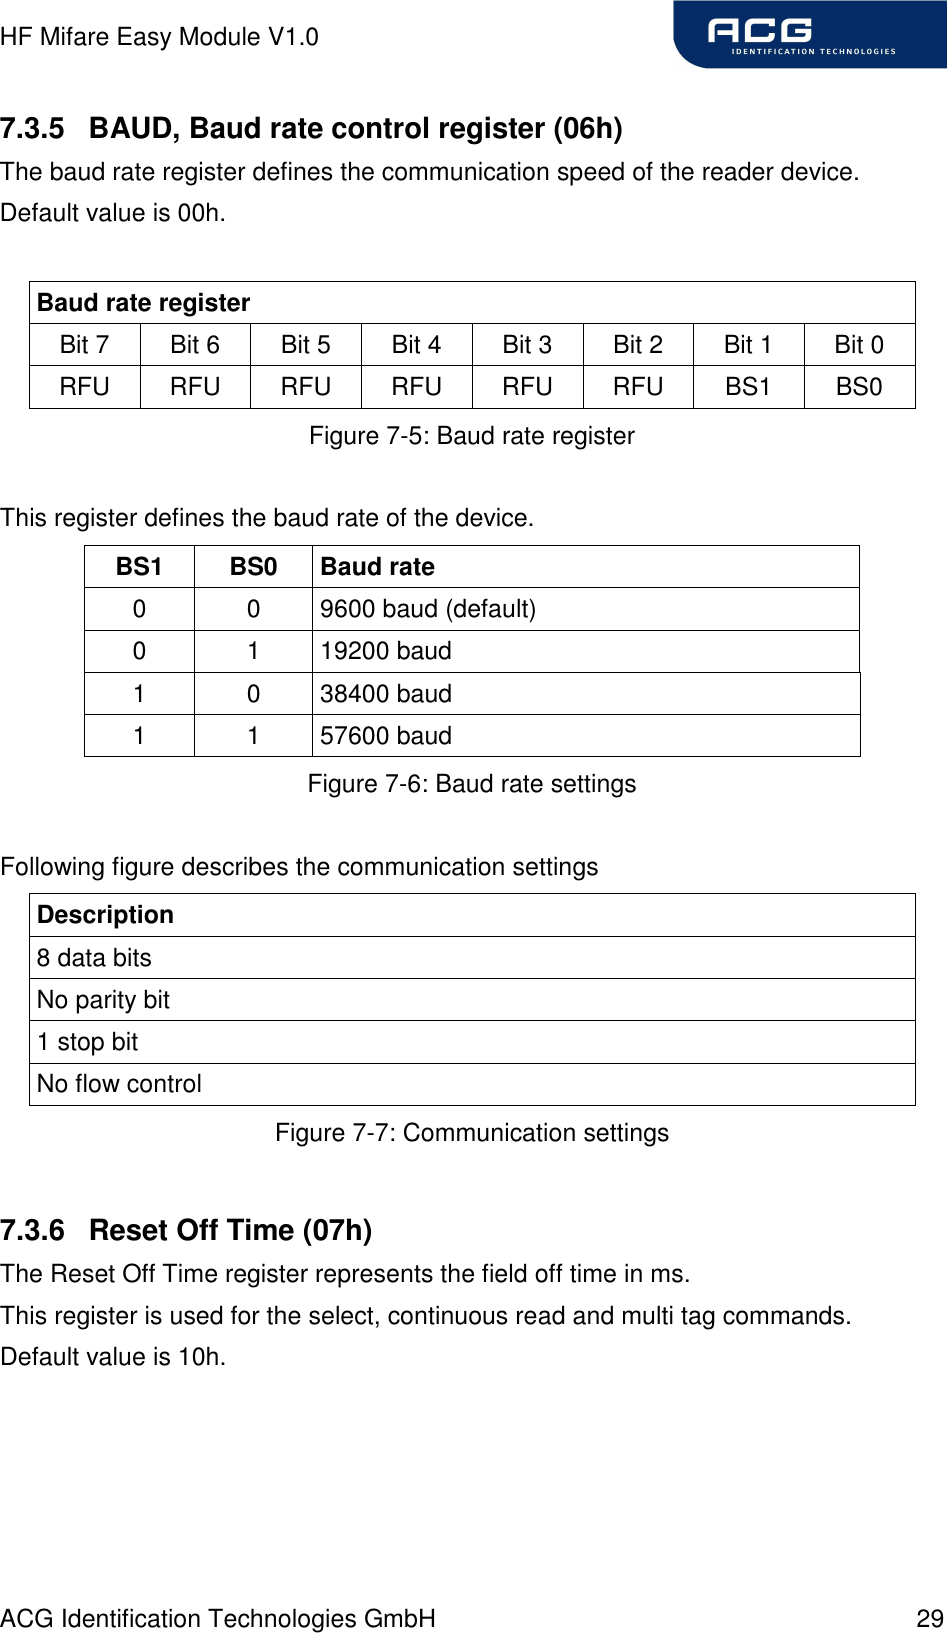 HF Mifare Easy Module V1.0 ACG Identification Technologies GmbH  29 7.3.5  BAUD, Baud rate control register (06h) The baud rate register defines the communication speed of the reader device. Default value is 00h.  Baud rate register Bit 7   Bit 6  Bit 5  Bit 4  Bit 3  Bit 2  Bit 1  Bit 0  RFU  RFU  RFU  RFU  RFU  RFU  BS1  BS0 Figure 7-5: Baud rate register  This register defines the baud rate of the device.  BS1  BS0  Baud rate 0  0  9600 baud (default) 0  1  19200 baud 1  0  38400 baud 1  1  57600 baud Figure 7-6: Baud rate settings  Following figure describes the communication settings Description 8 data bits No parity bit 1 stop bit No flow control Figure 7-7: Communication settings  7.3.6  Reset Off Time (07h) The Reset Off Time register represents the field off time in ms. This register is used for the select, continuous read and multi tag commands. Default value is 10h.  